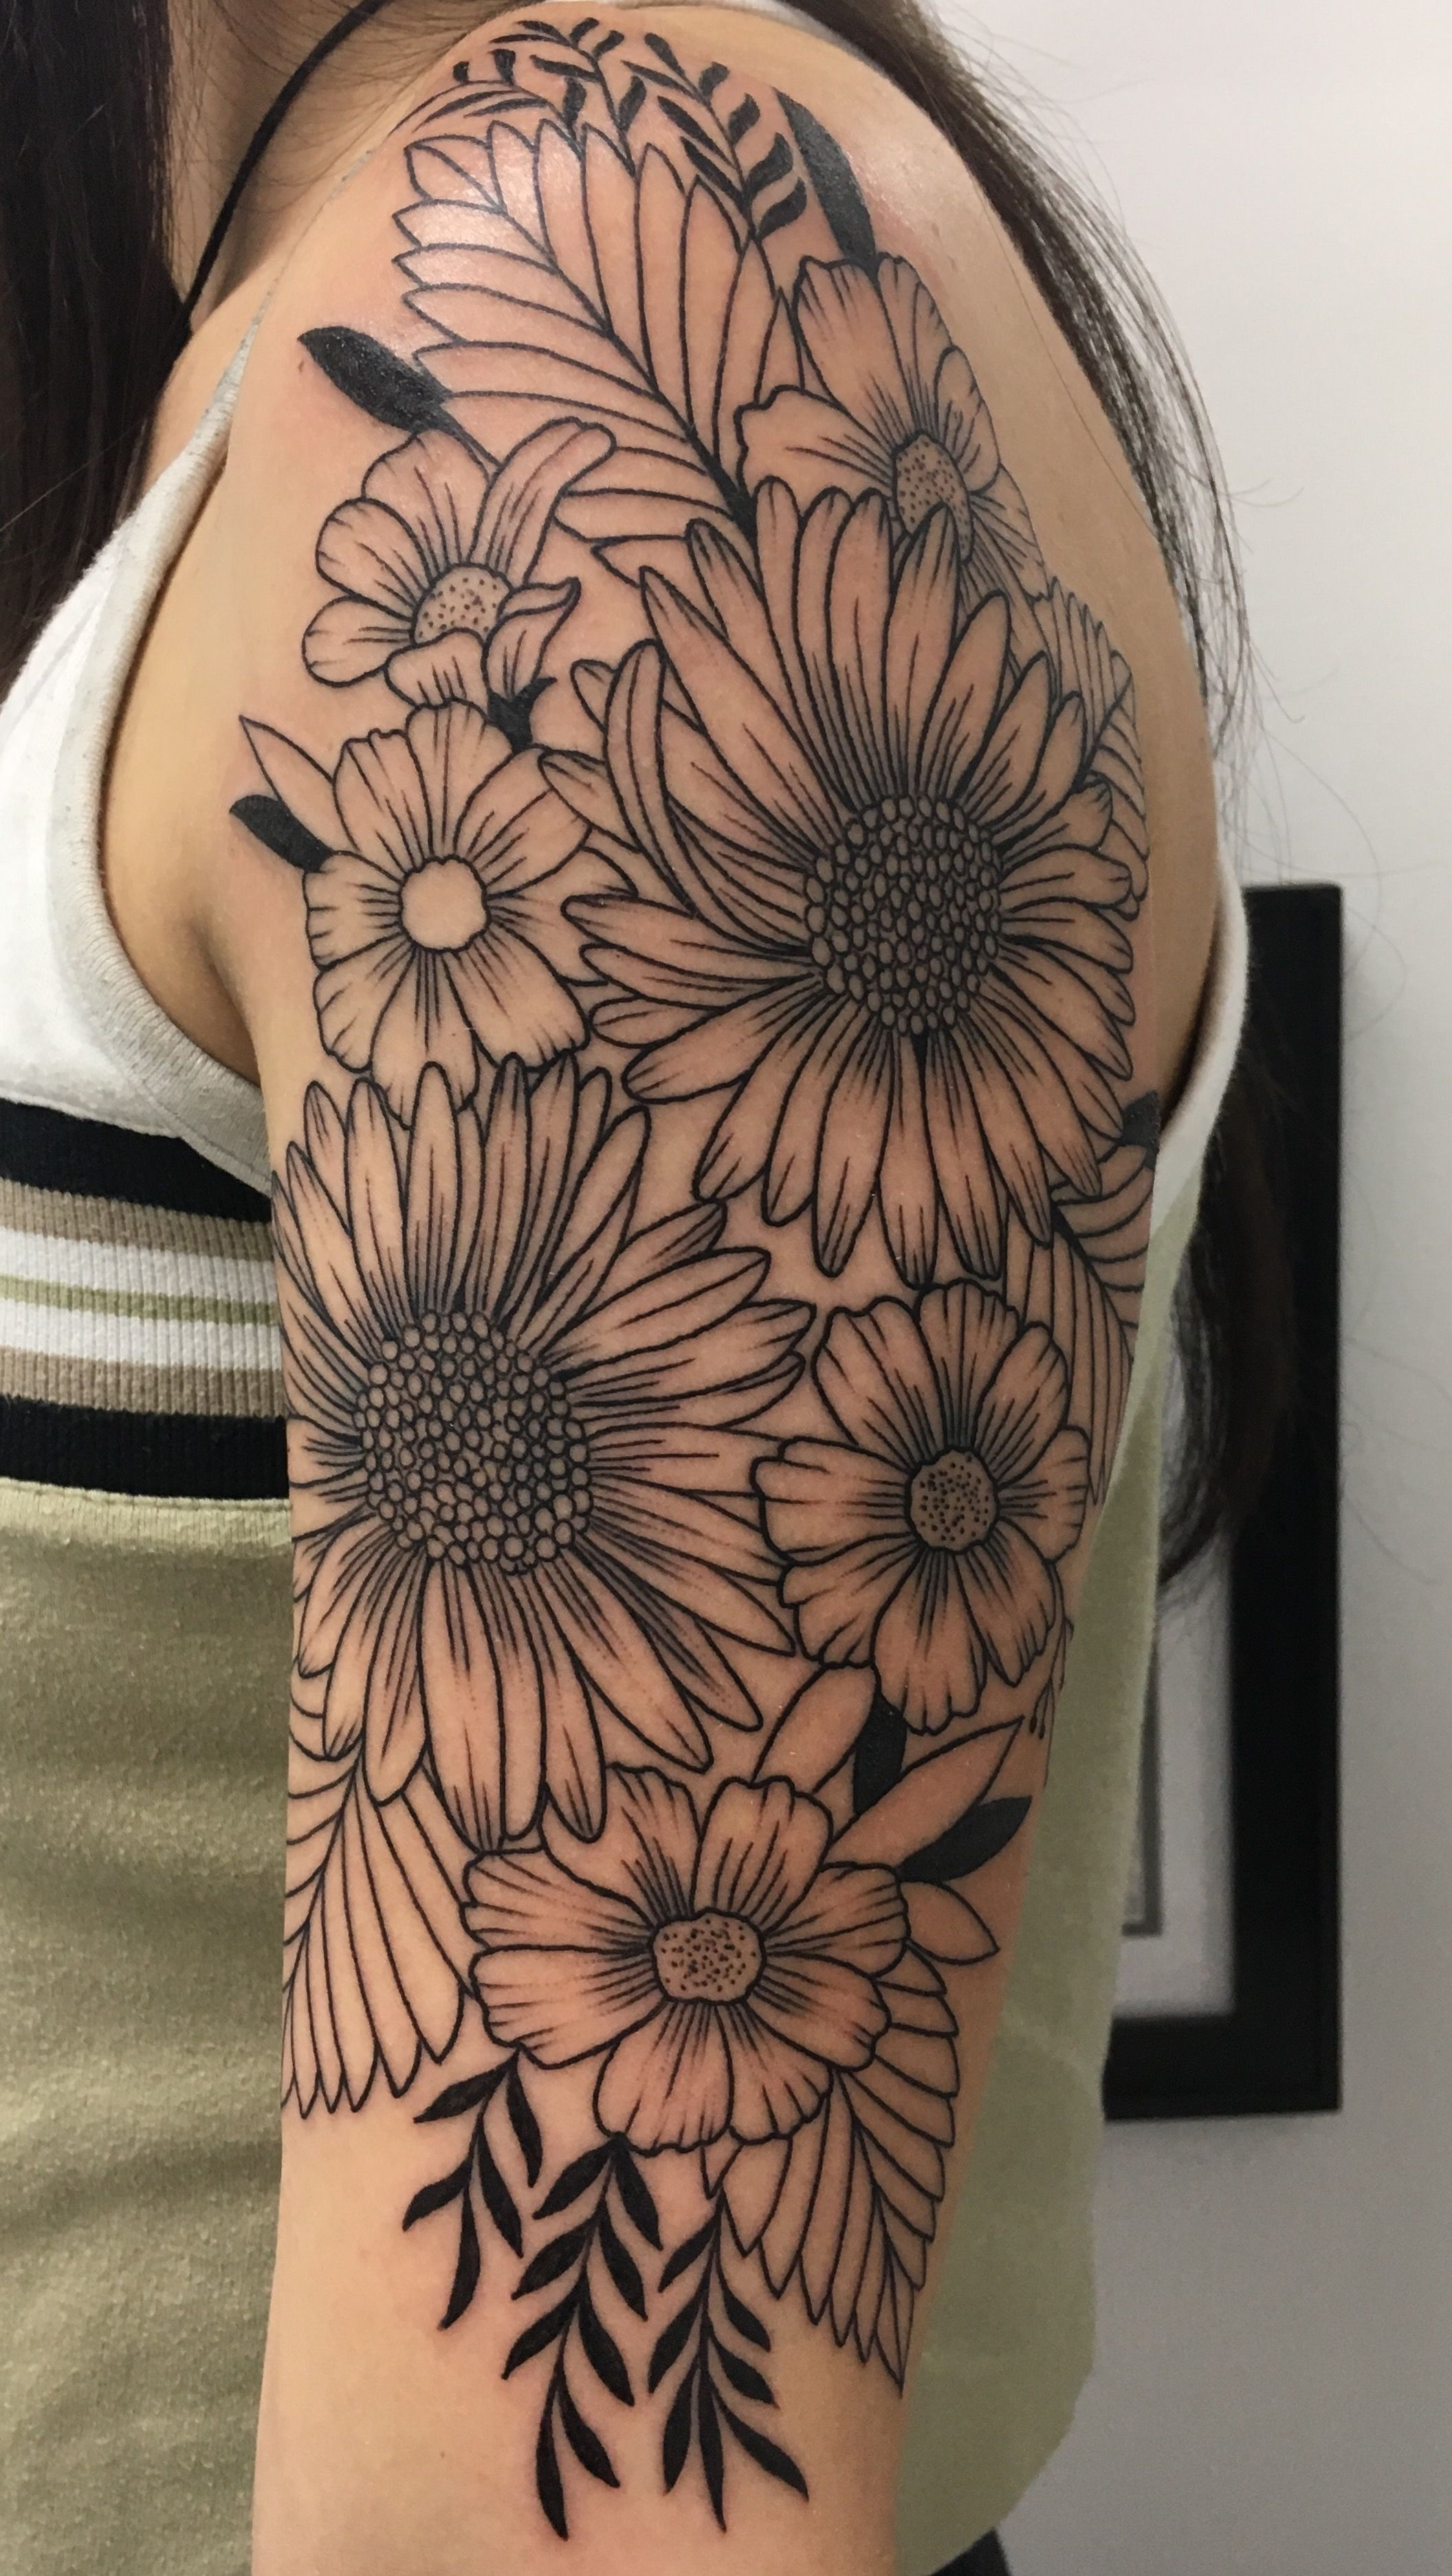 Number 4 Half Sleeve Wildflower Tattoo Took About 3 12 Hours for sizing 2112 X 3748